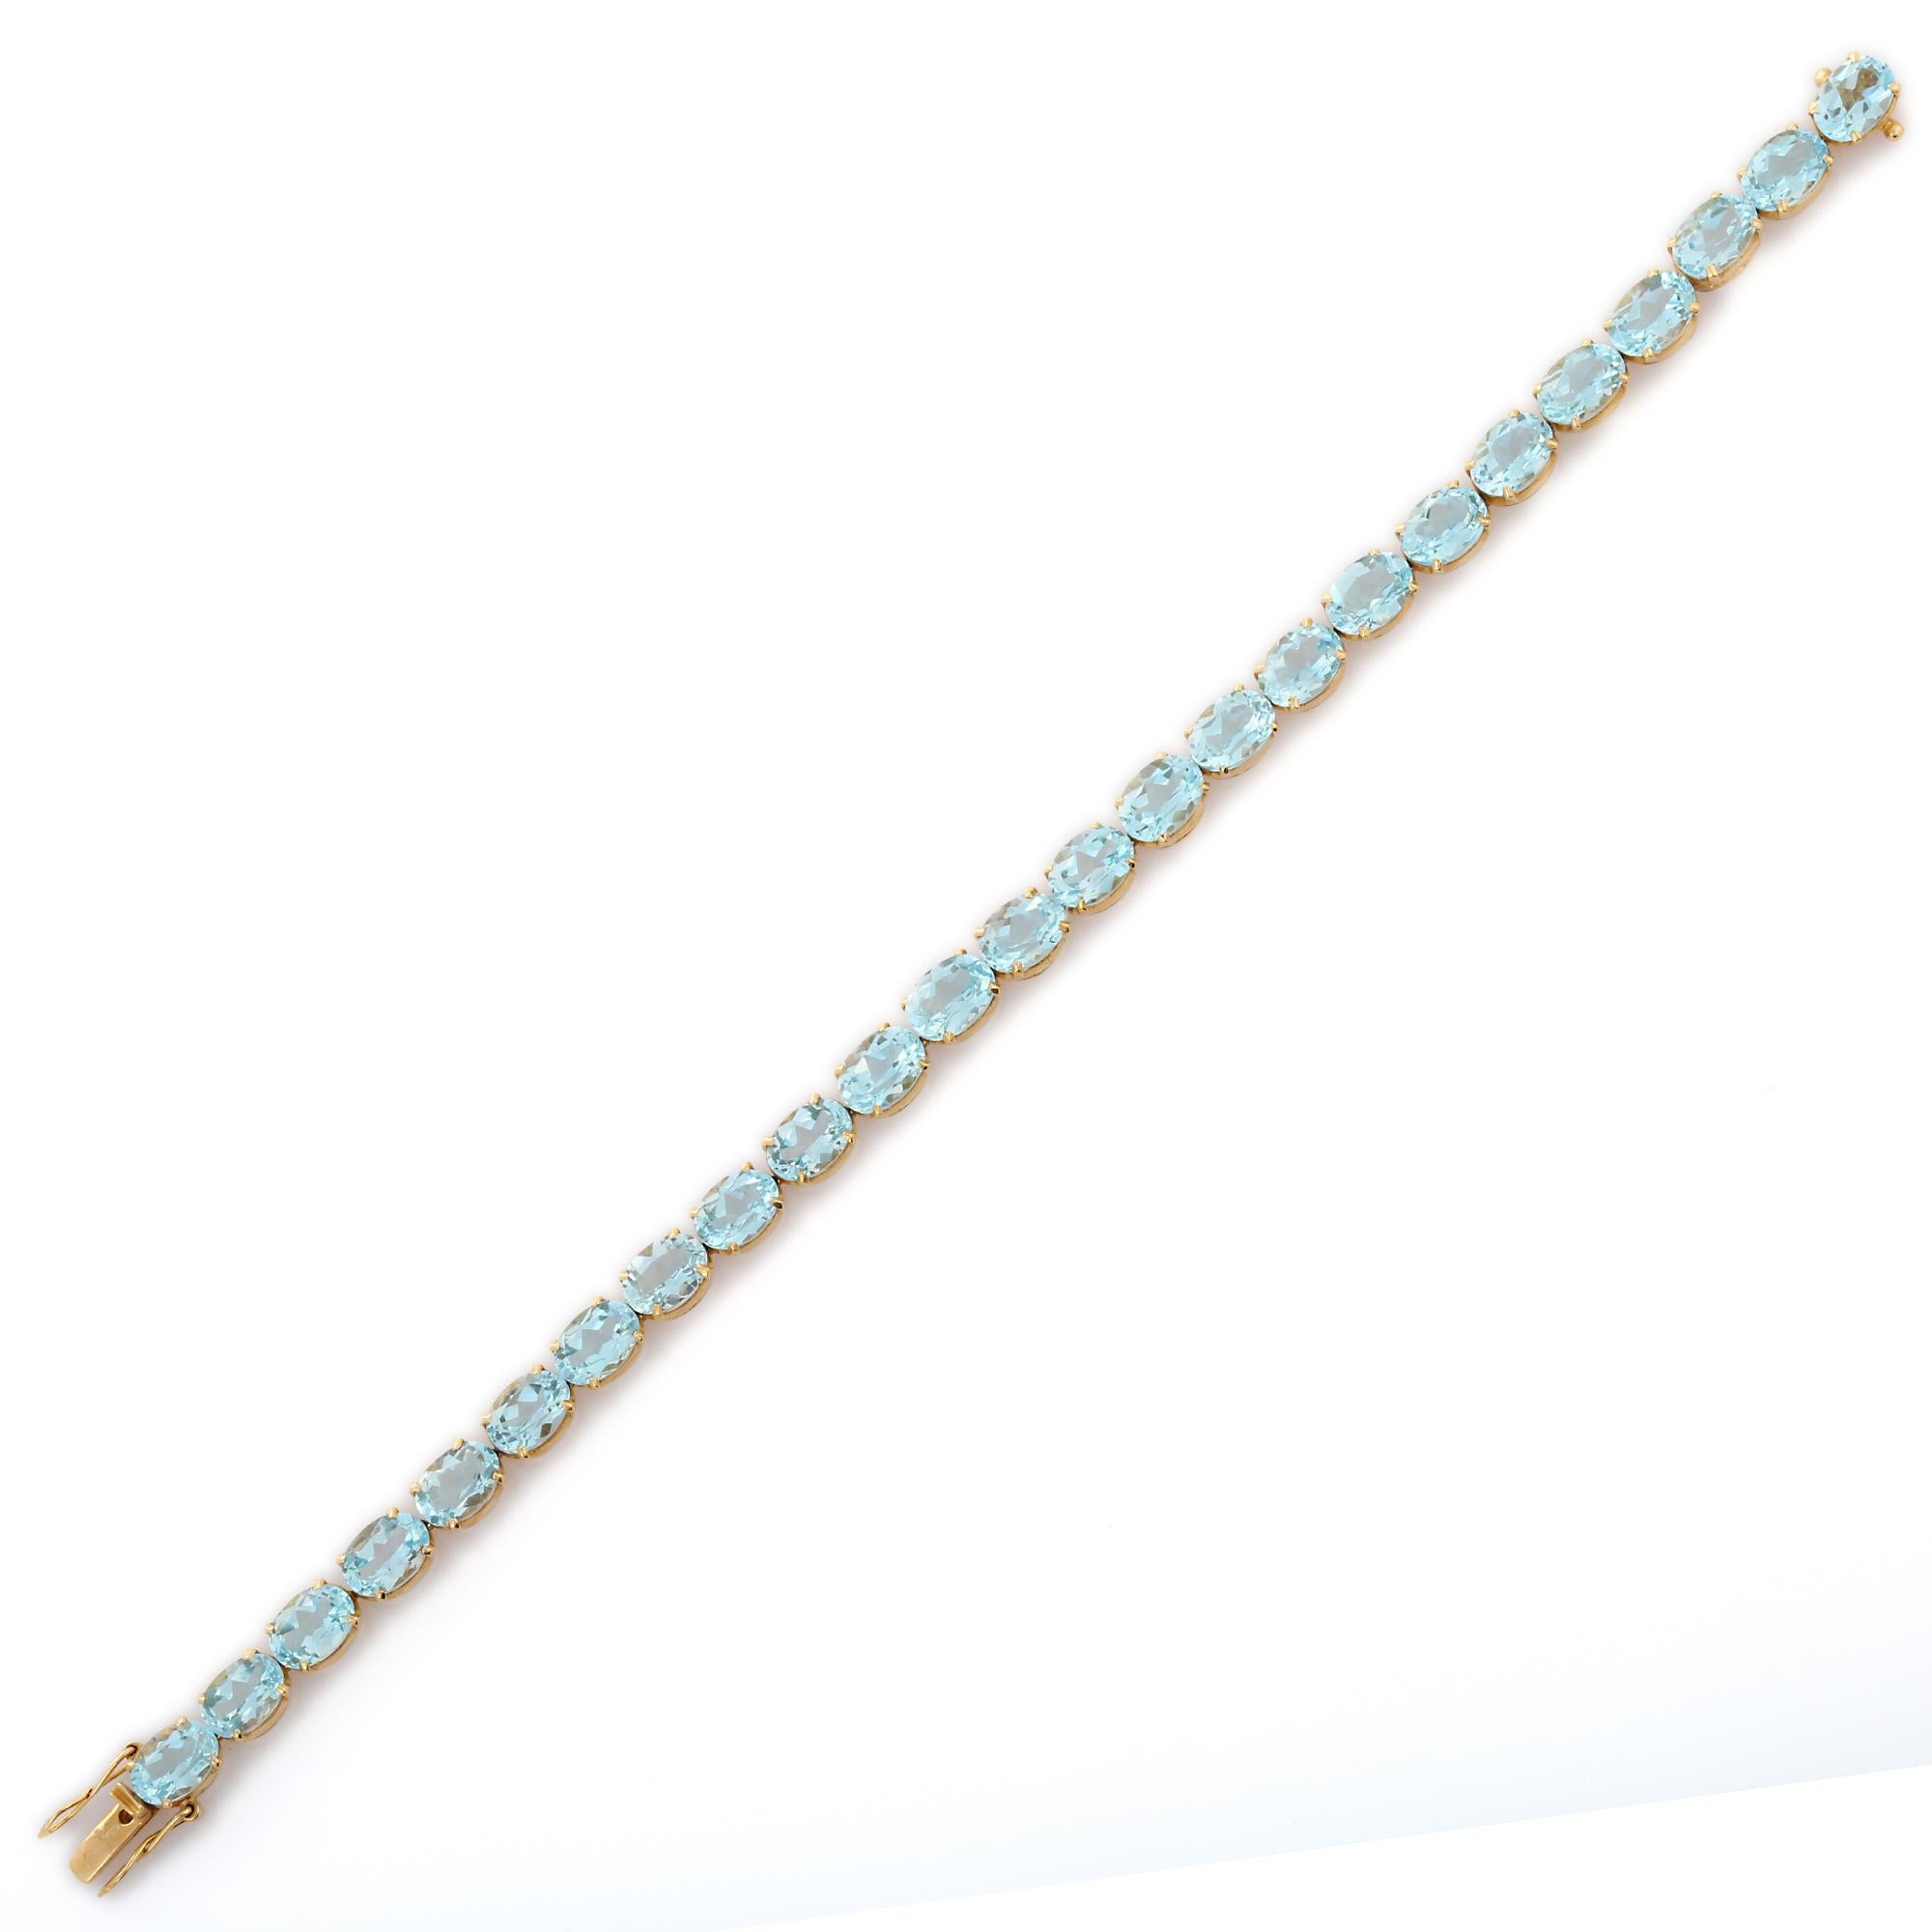 Oval Cut 18kt Solid Yellow Gold 28.5 Carats Faceted Blue Topaz Gemstone Tennis Bracelet For Sale